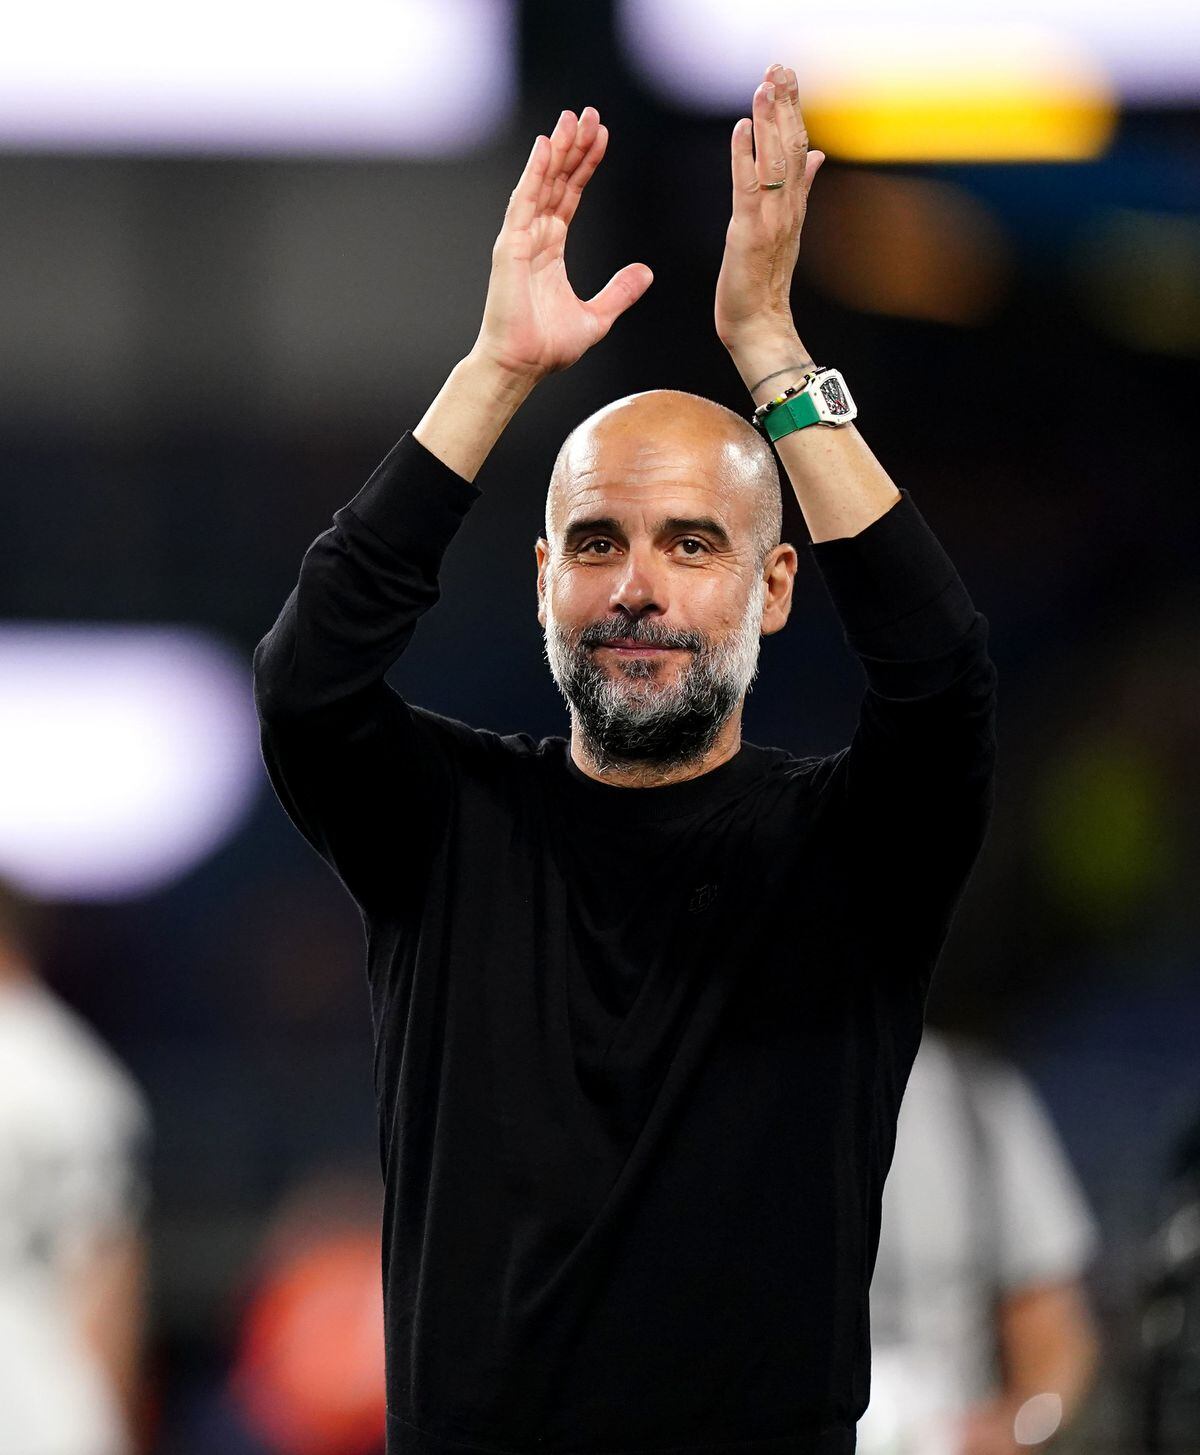 Pep Guardiola will stand firm with Man City – even if it’s in League One